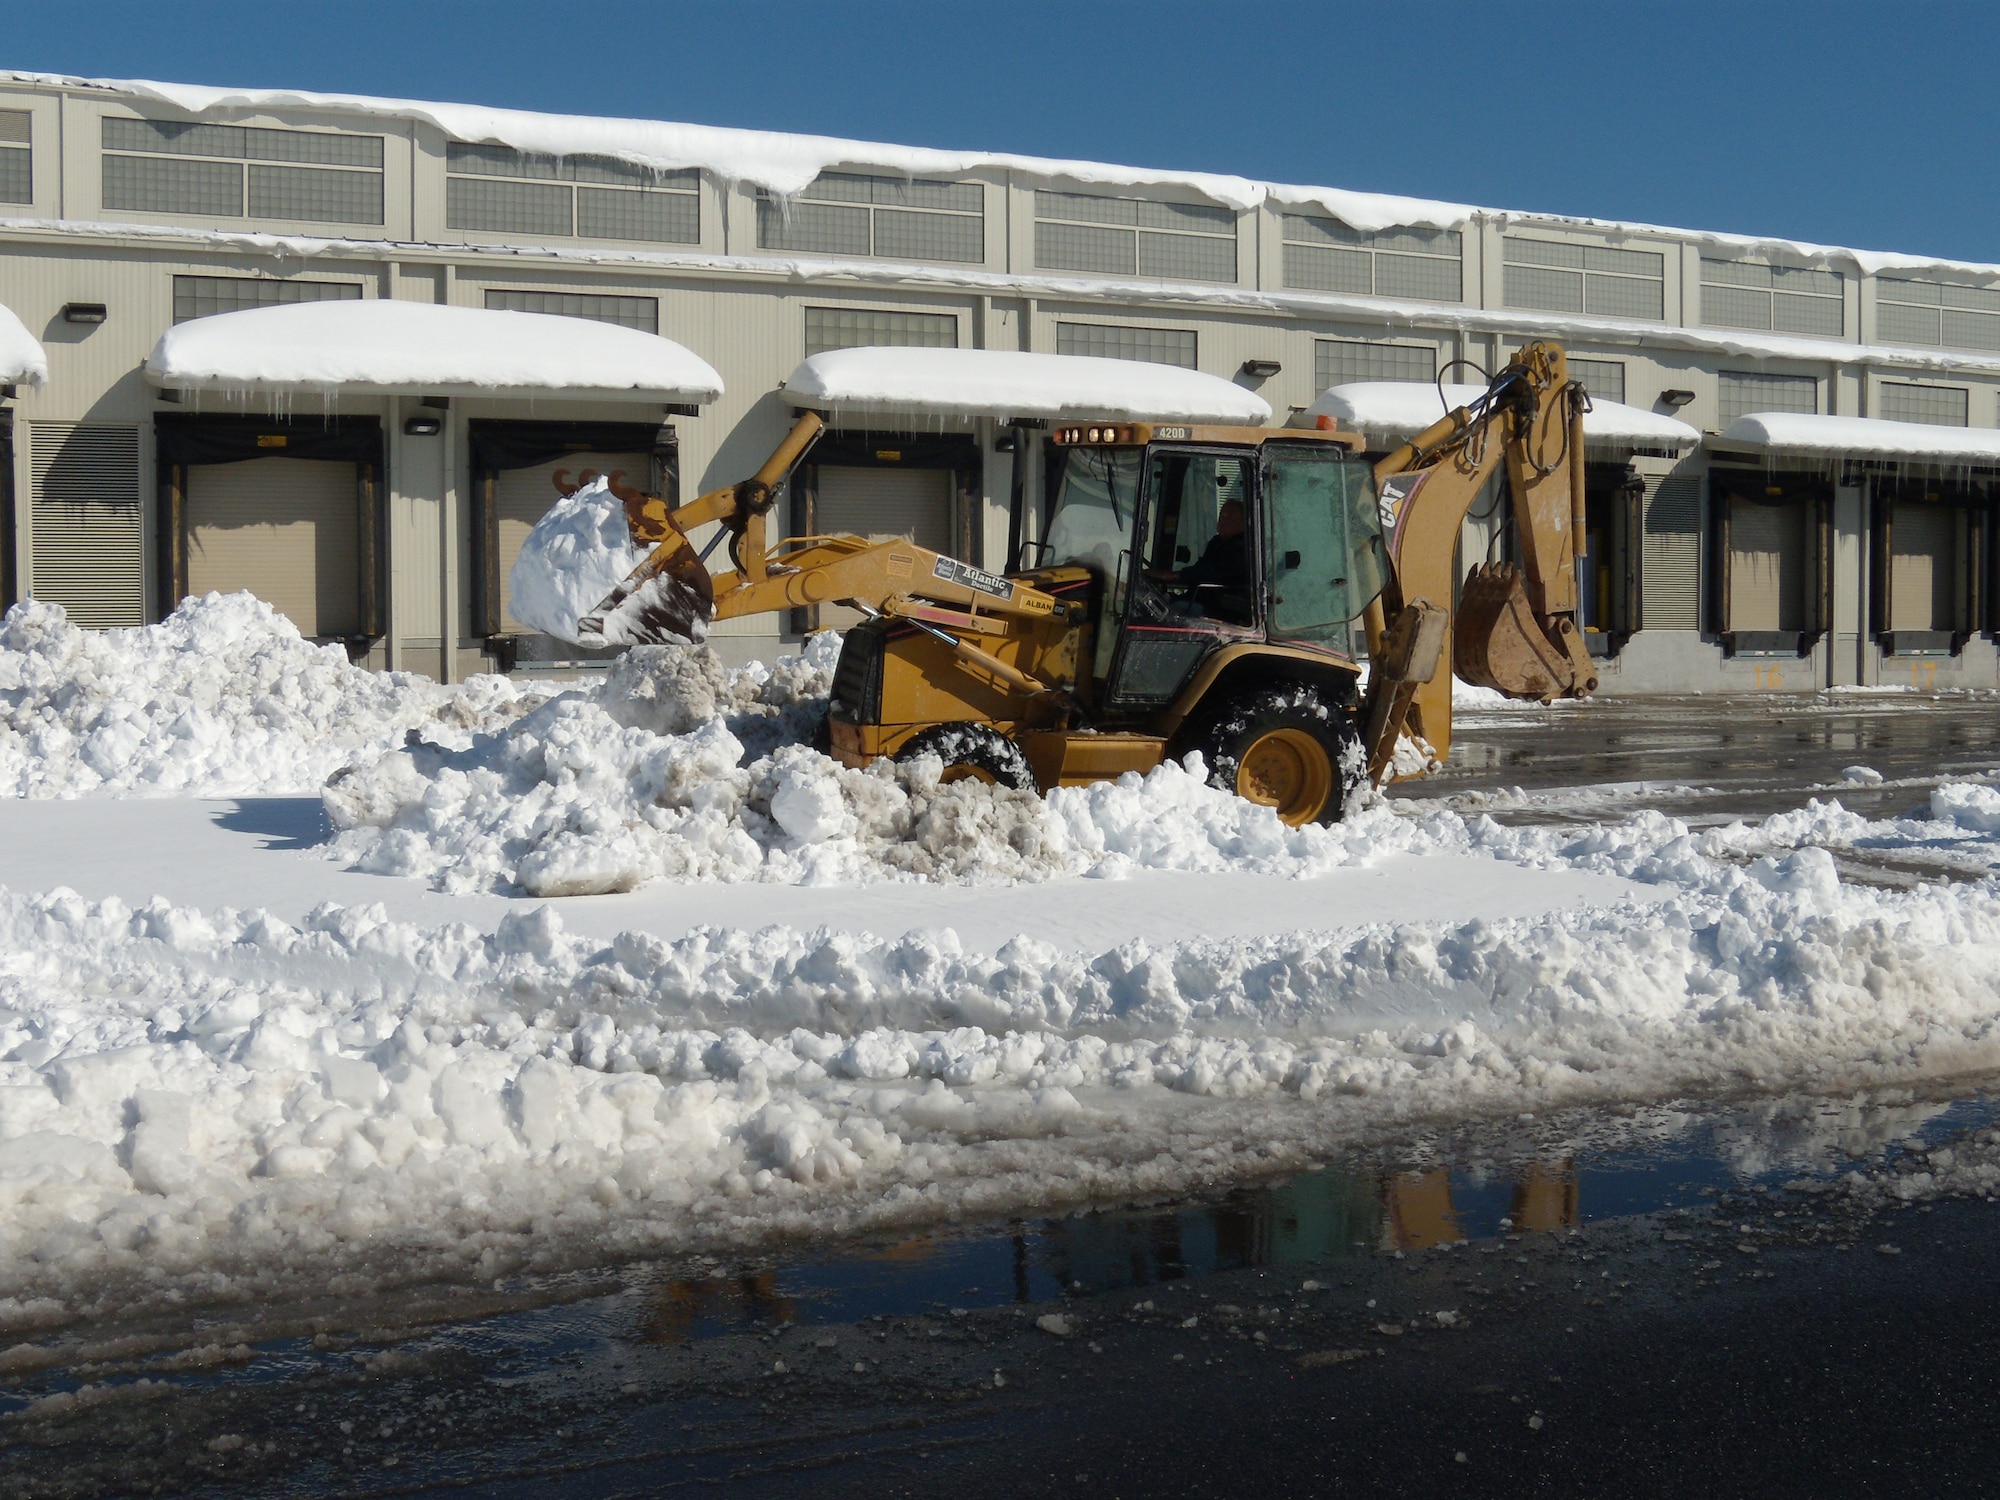 A Team Dover member removes snow from the loading docks at the Dover Air Force Base Aerial Port.  Team Dover worked to clear the snow that blanketed the installation Feb. 6, and to keep operations going. (U.S. Air Force photo/1st Lt. Brian Maguire)